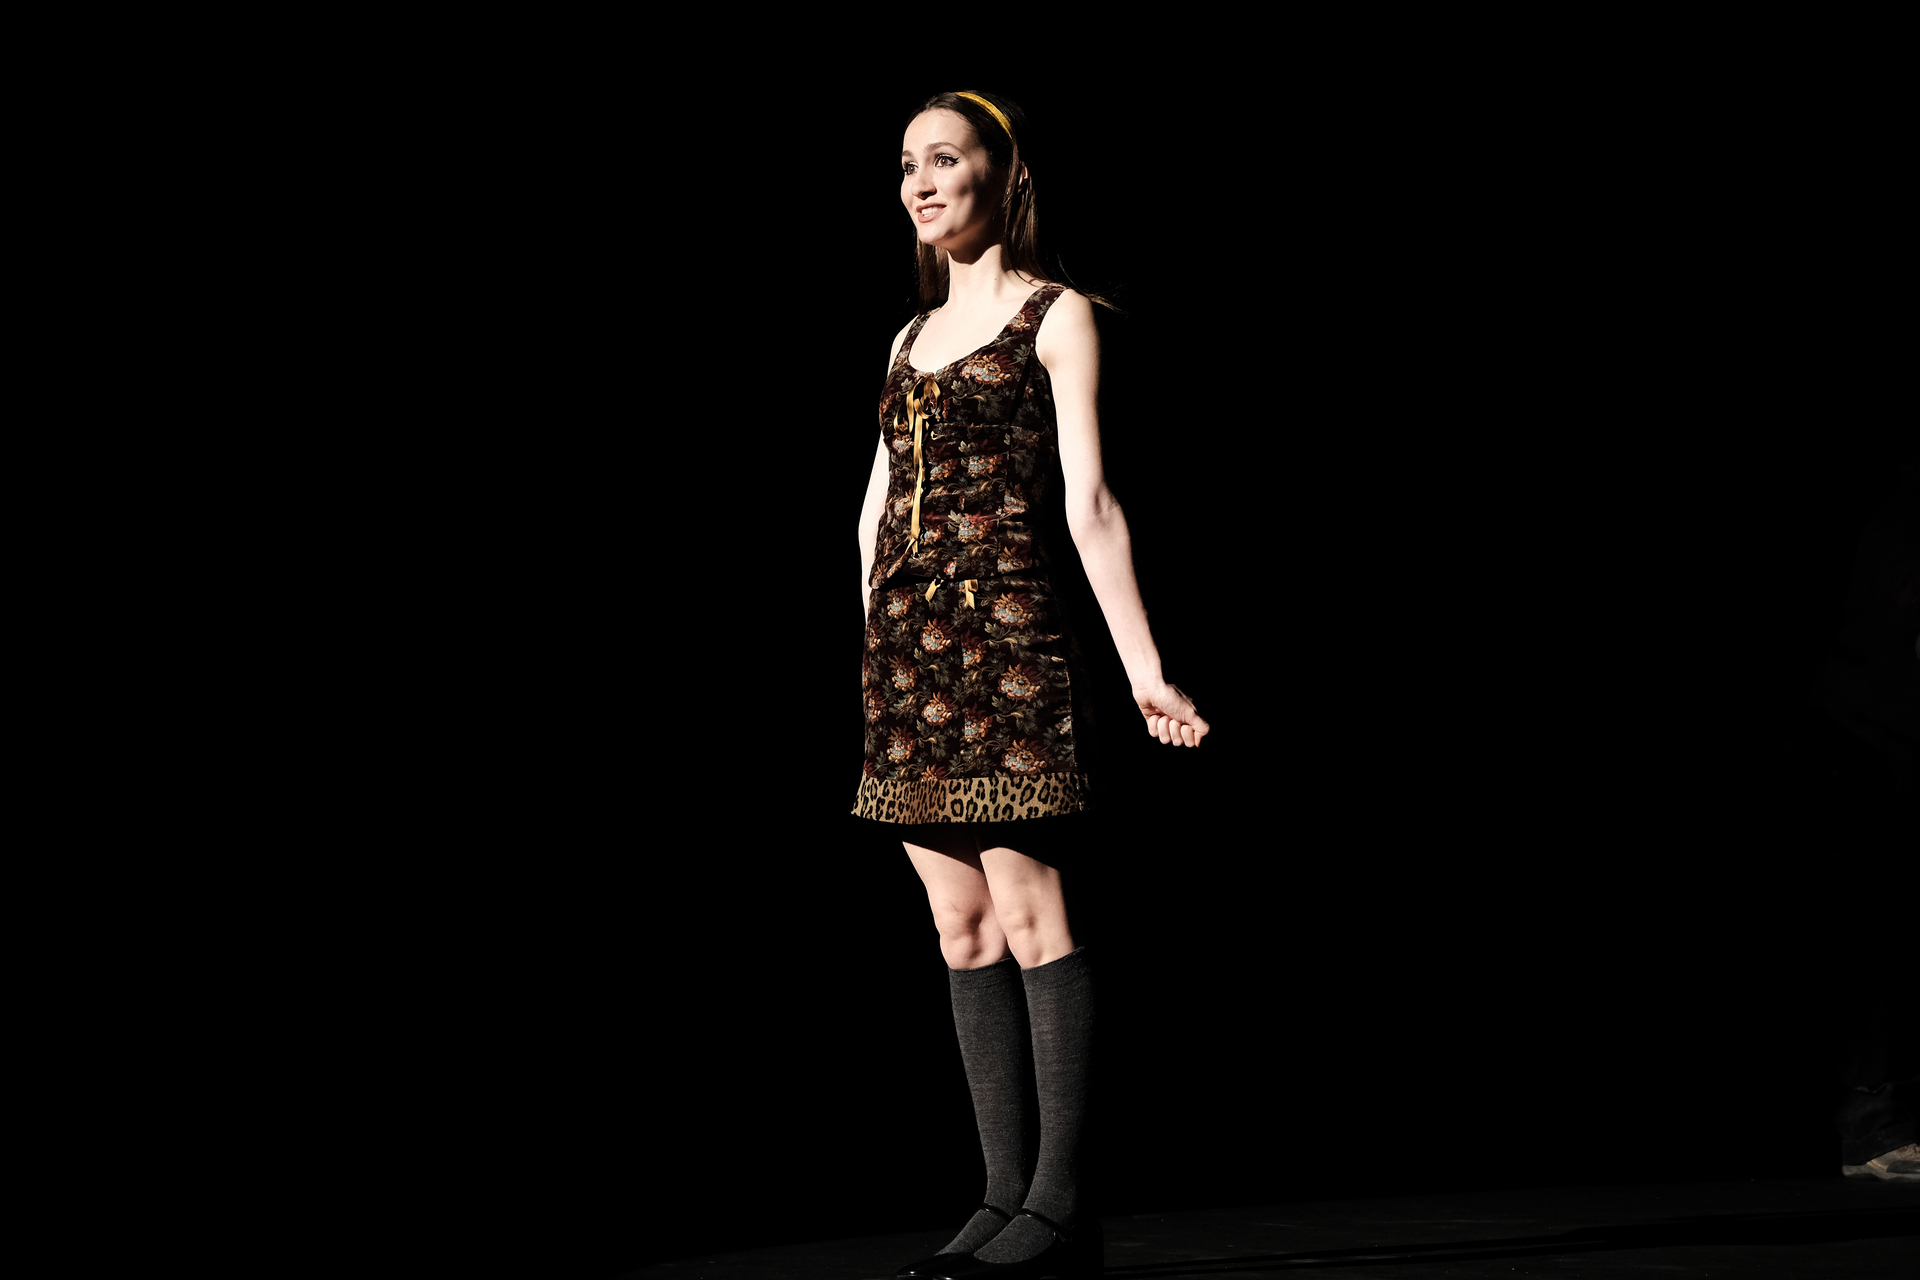 Euphoria's Maude Apatow Makes Broadway Debut in 'Little Shop of